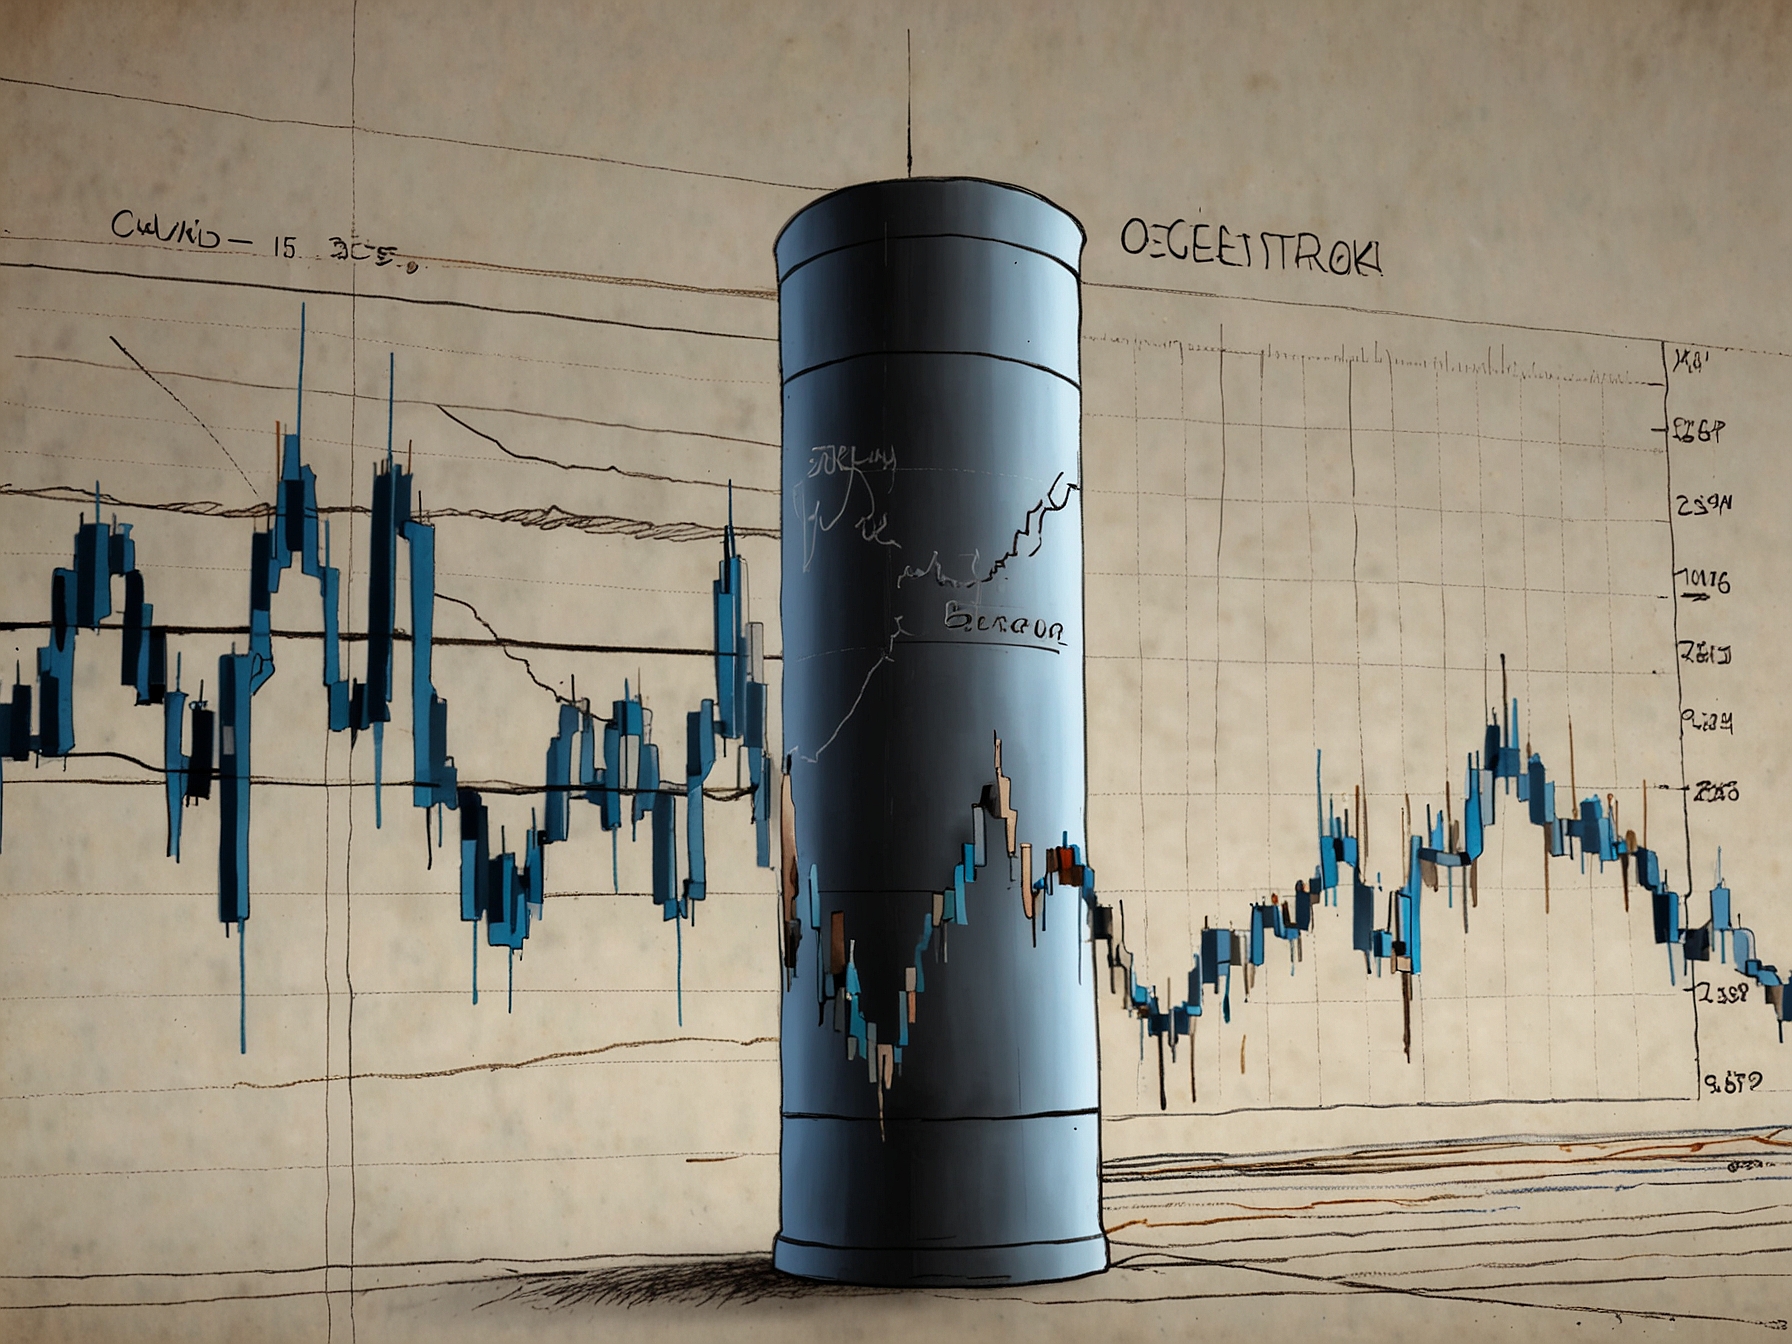 An upward trending stock chart representing Occidental Petroleum's recent rise, highlighting its resilience amidst broader market fluctuations and industry challenges.